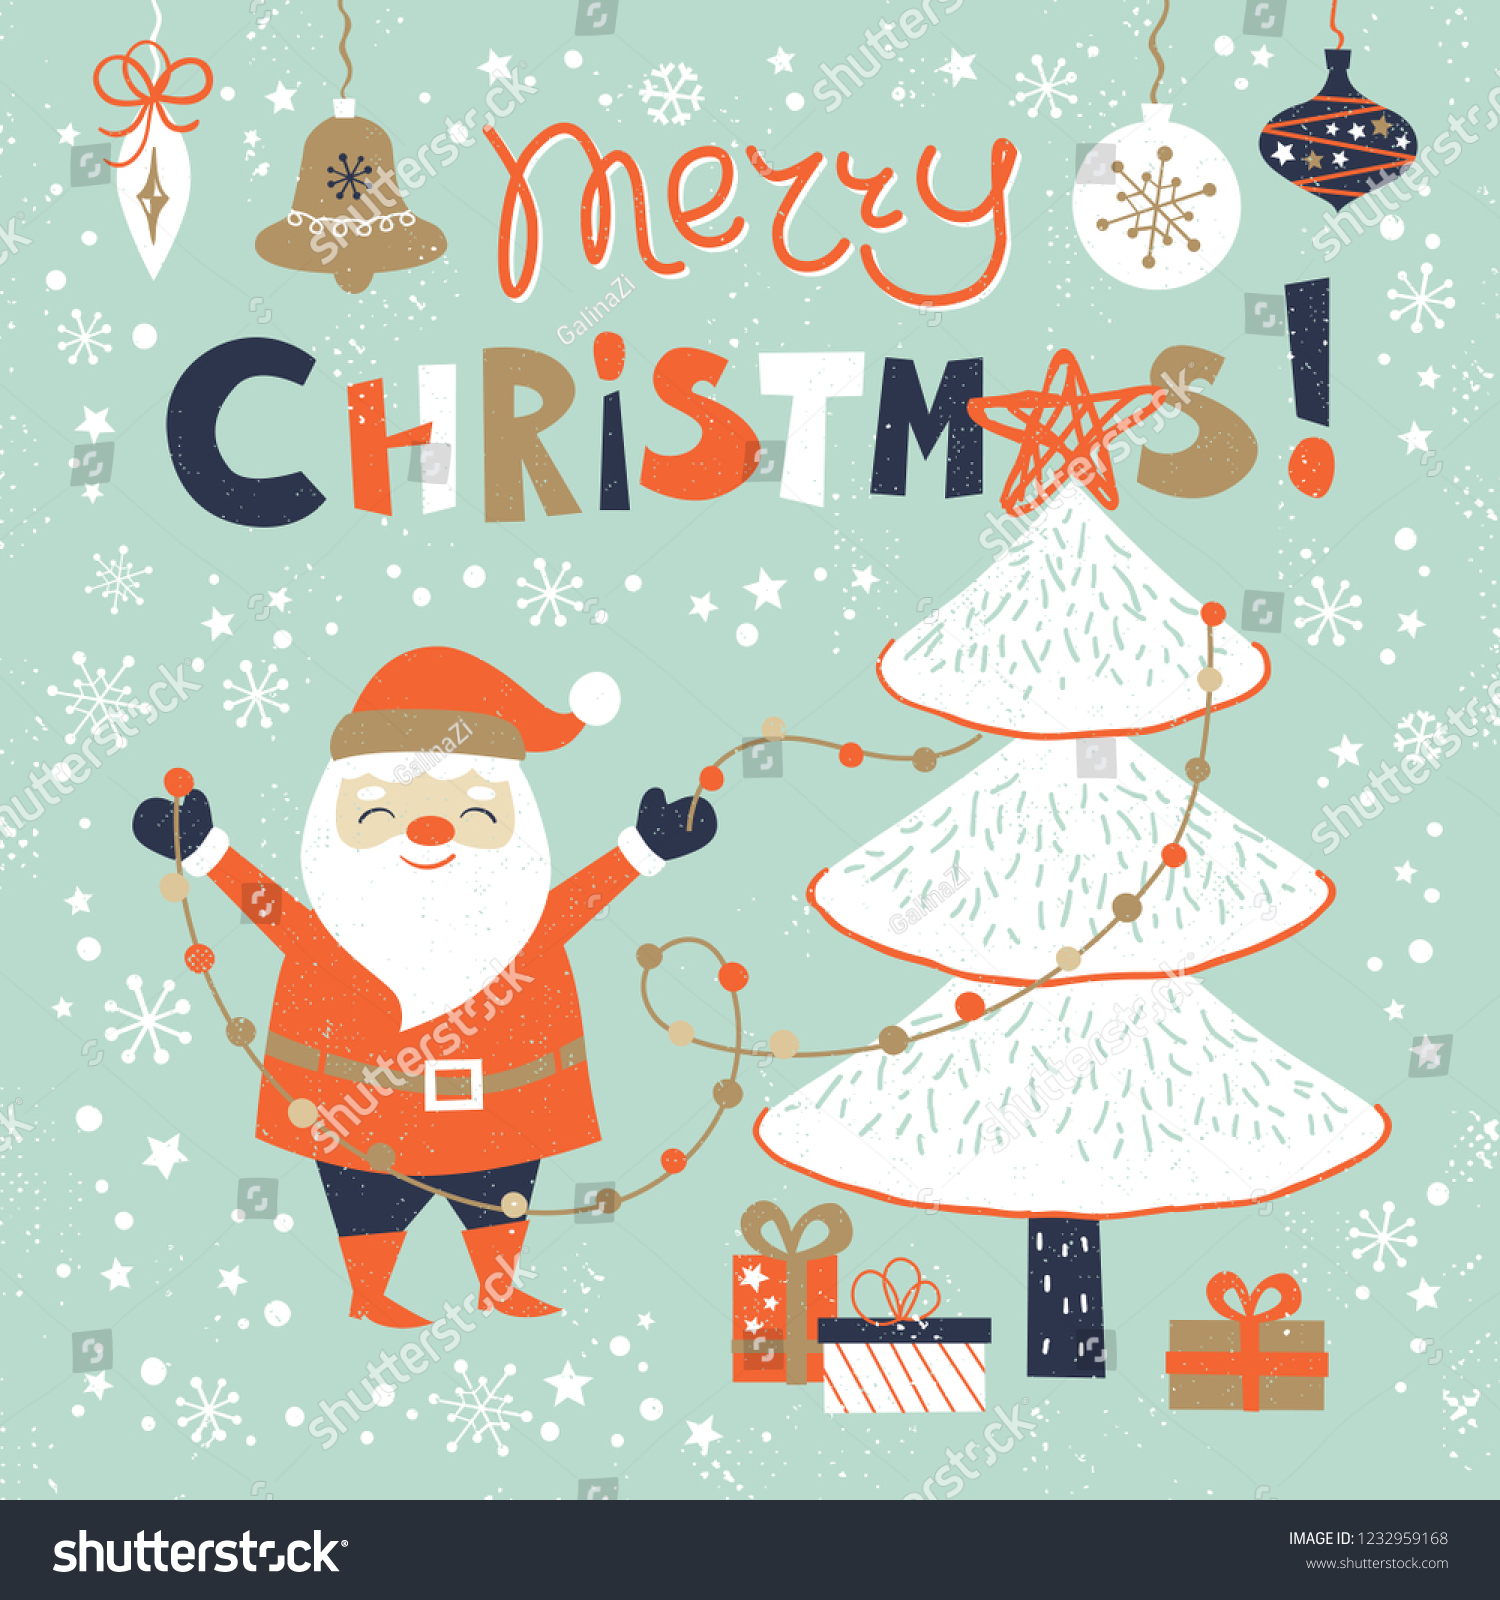 Merry Christmas Card Templates Hand Drawn Stock Vector Royalty Free 1232959168